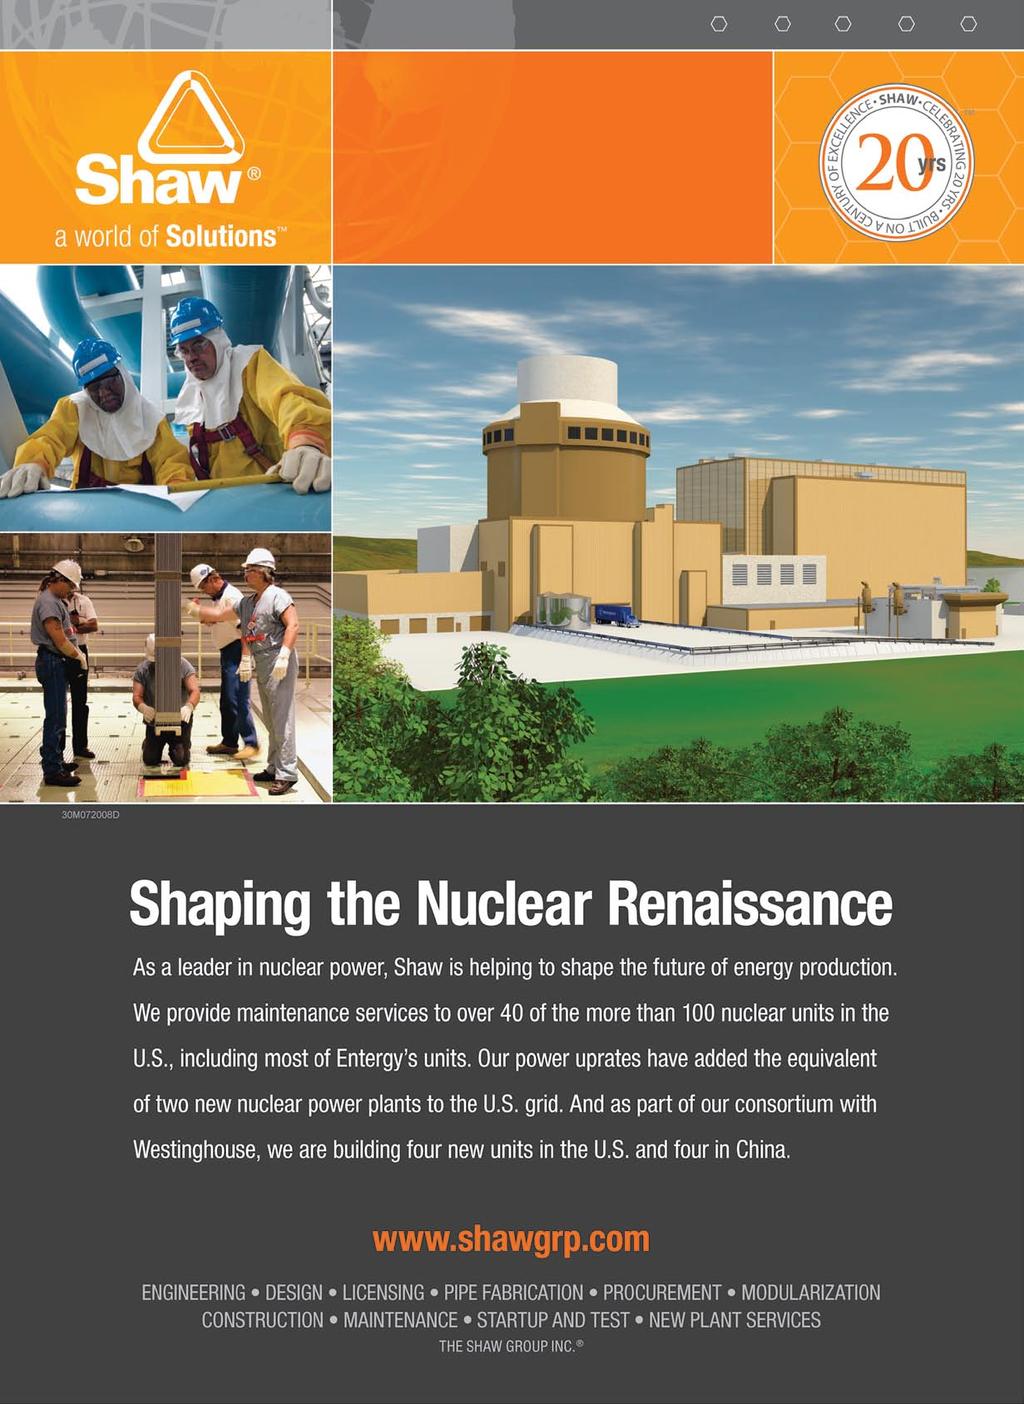 E n t e r g y N u c l e a r Shaw Group With more than 100 operating nuclear units in the US, maintaining this emission-free source of baseload generation is crucial to our country s energy needs.